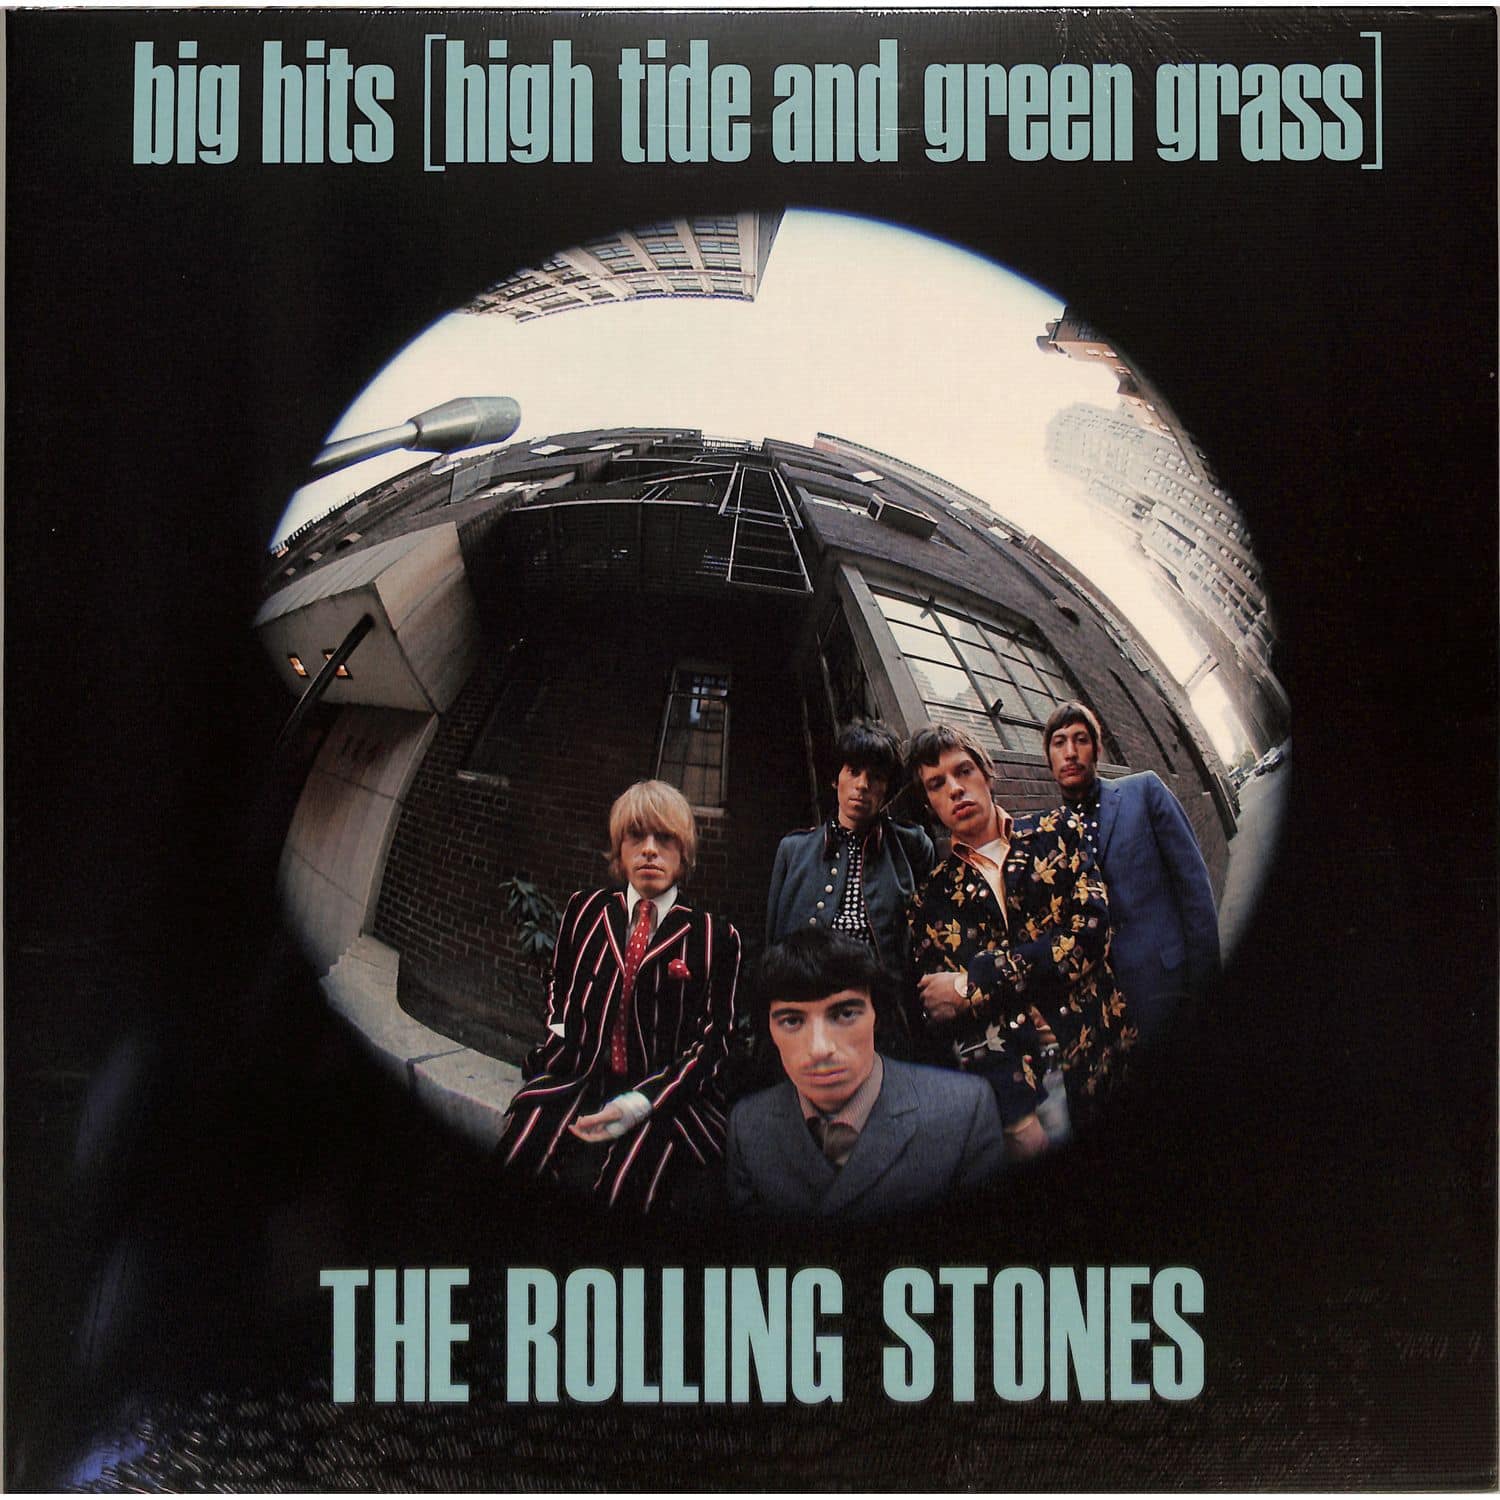 The Rolling Stones - BIG HITS 